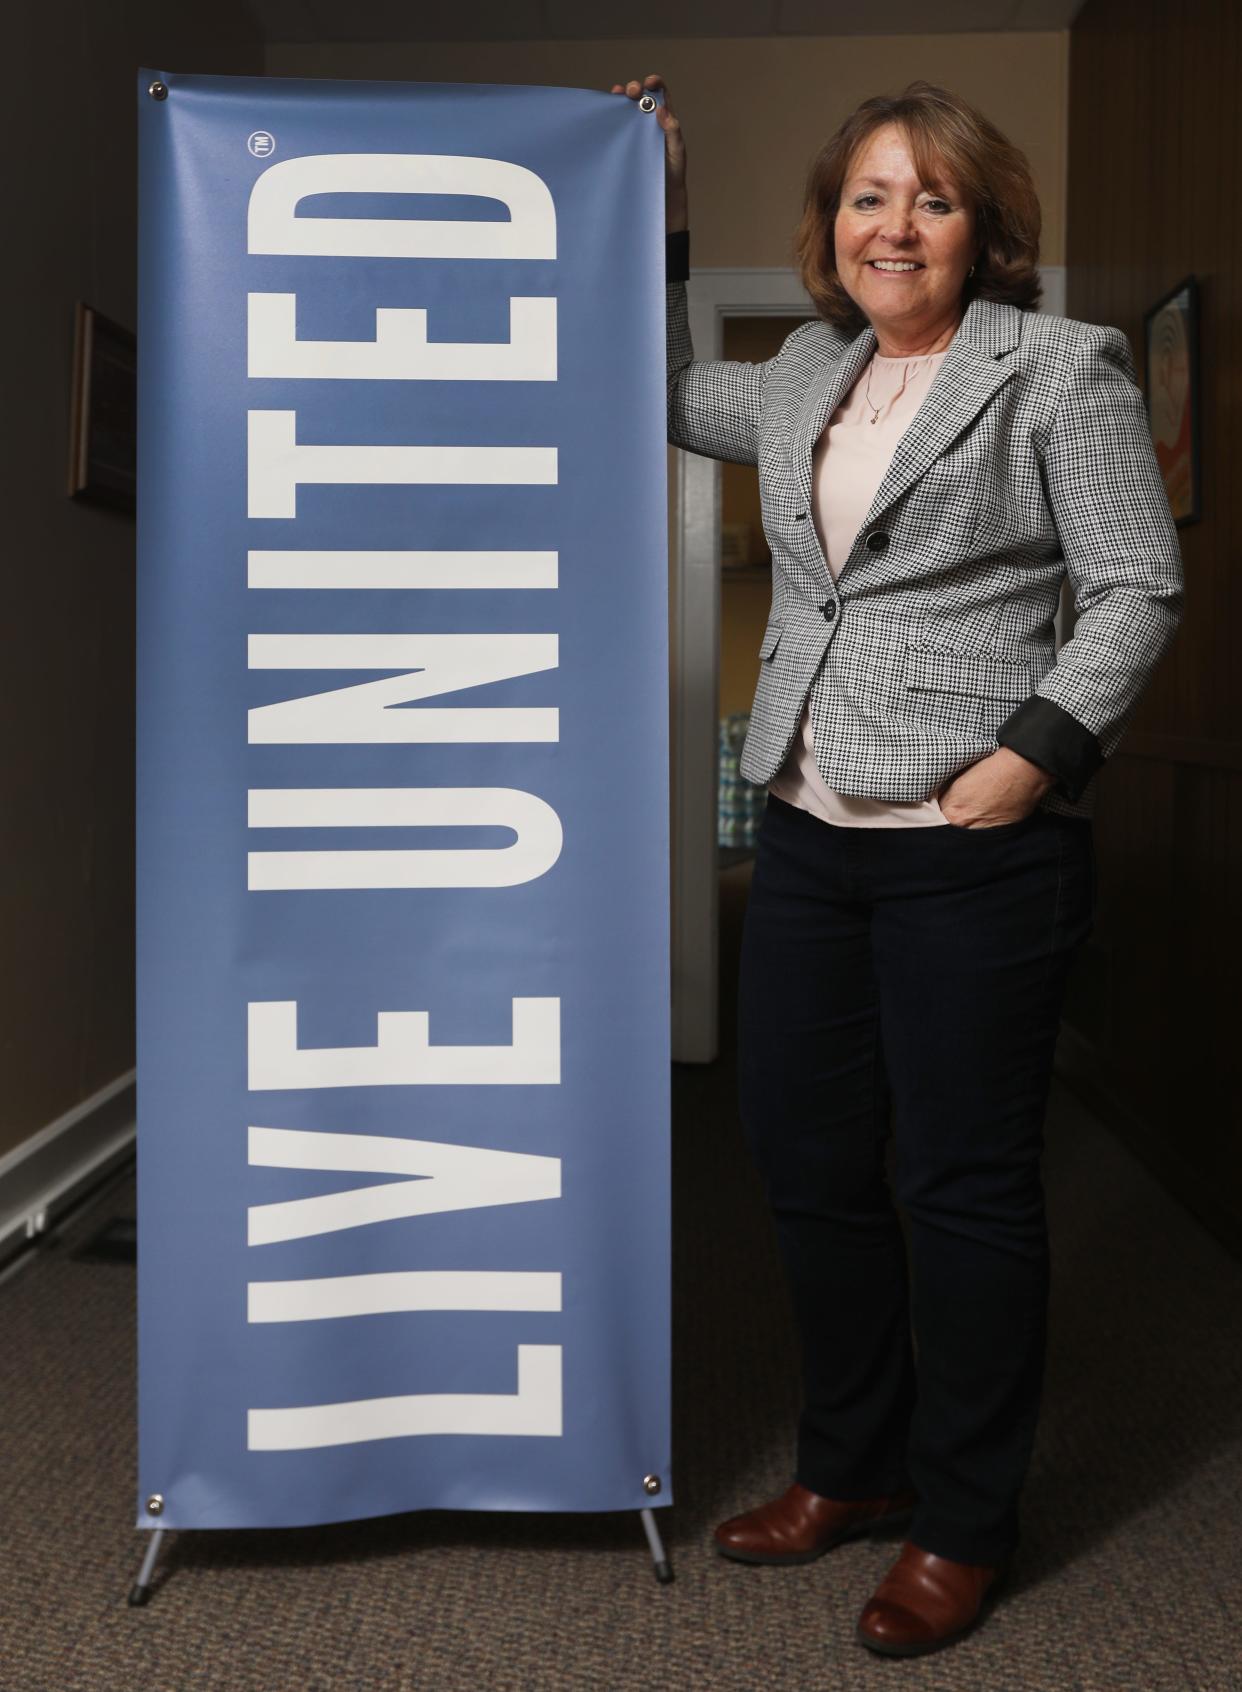 Lyn Mizer has been the director of the United Way of Coshocton since 2010.